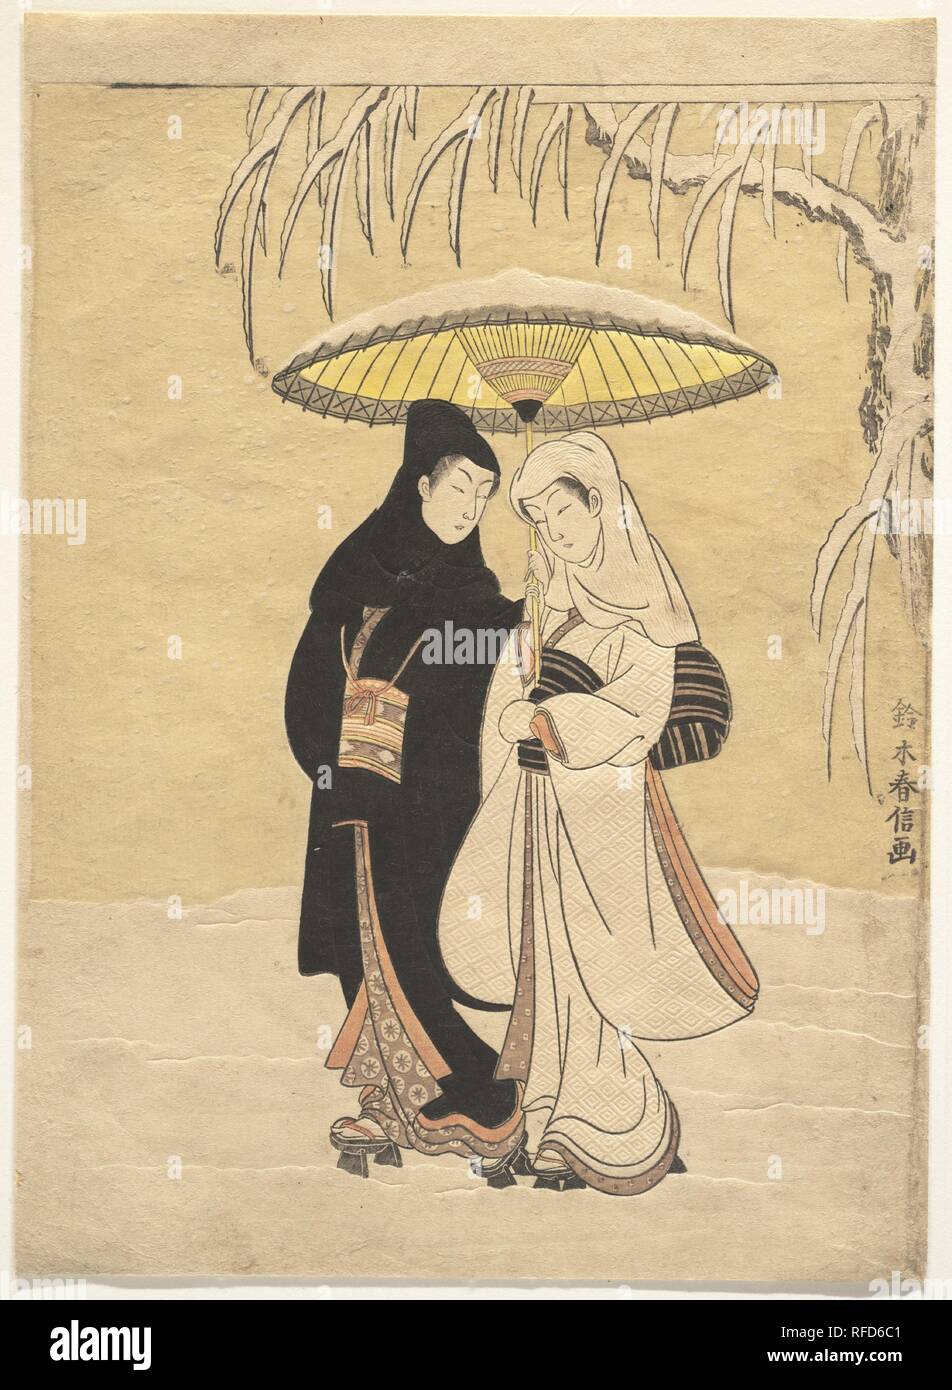 Lovers Walking in the Snow (Crow and Heron). Artist: Suzuki Harunobu (Japanese, 1725-1770). Culture: Japan. Dimensions: H. 11 1/4 in. (28.6 cm); W. 8 1/8 in. (20.6 cm)  medium-size print (chu-ban). Date: 1764-72.  Of all ukiyo-e prints of lovers, this one creates the most romantic and melancholic mood. Harunobu emphasizes the intimacy of two lovers strolling in the snow, even suggesting perhaps a michiyuki, a path to a love suicide. The couple walk together in the quietly falling snow, in what is known as an ai ai gasa pose, literally, the sharing of an umbrella and love.   Harunobu, the origi Stock Photo